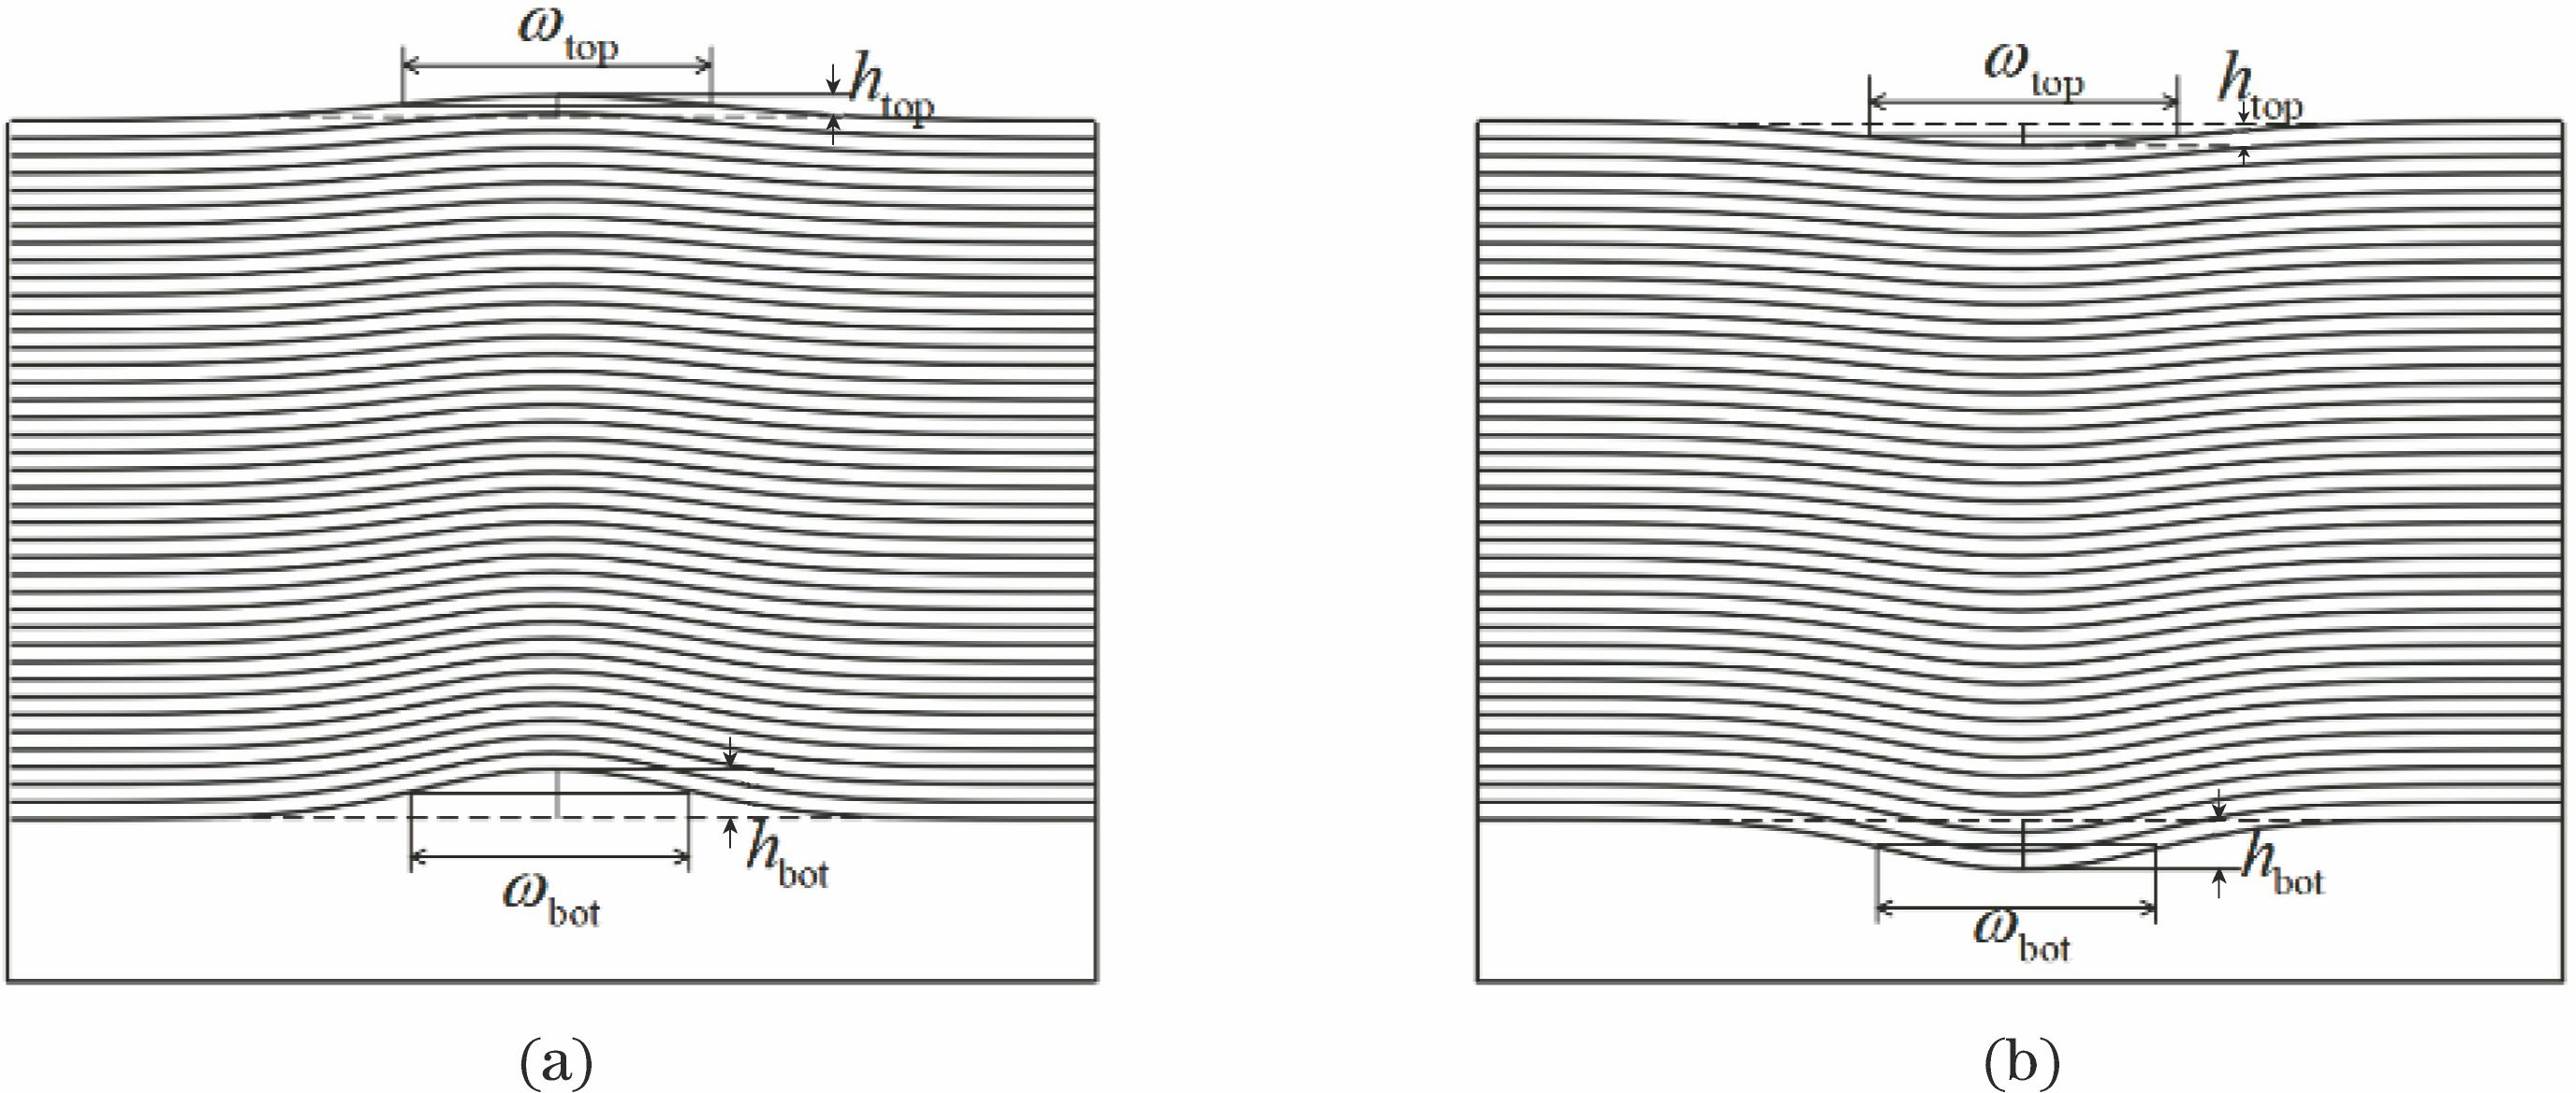 Schematic of defected multilayer film in EUV lithography. (a) Bump defect; (b) pit defect